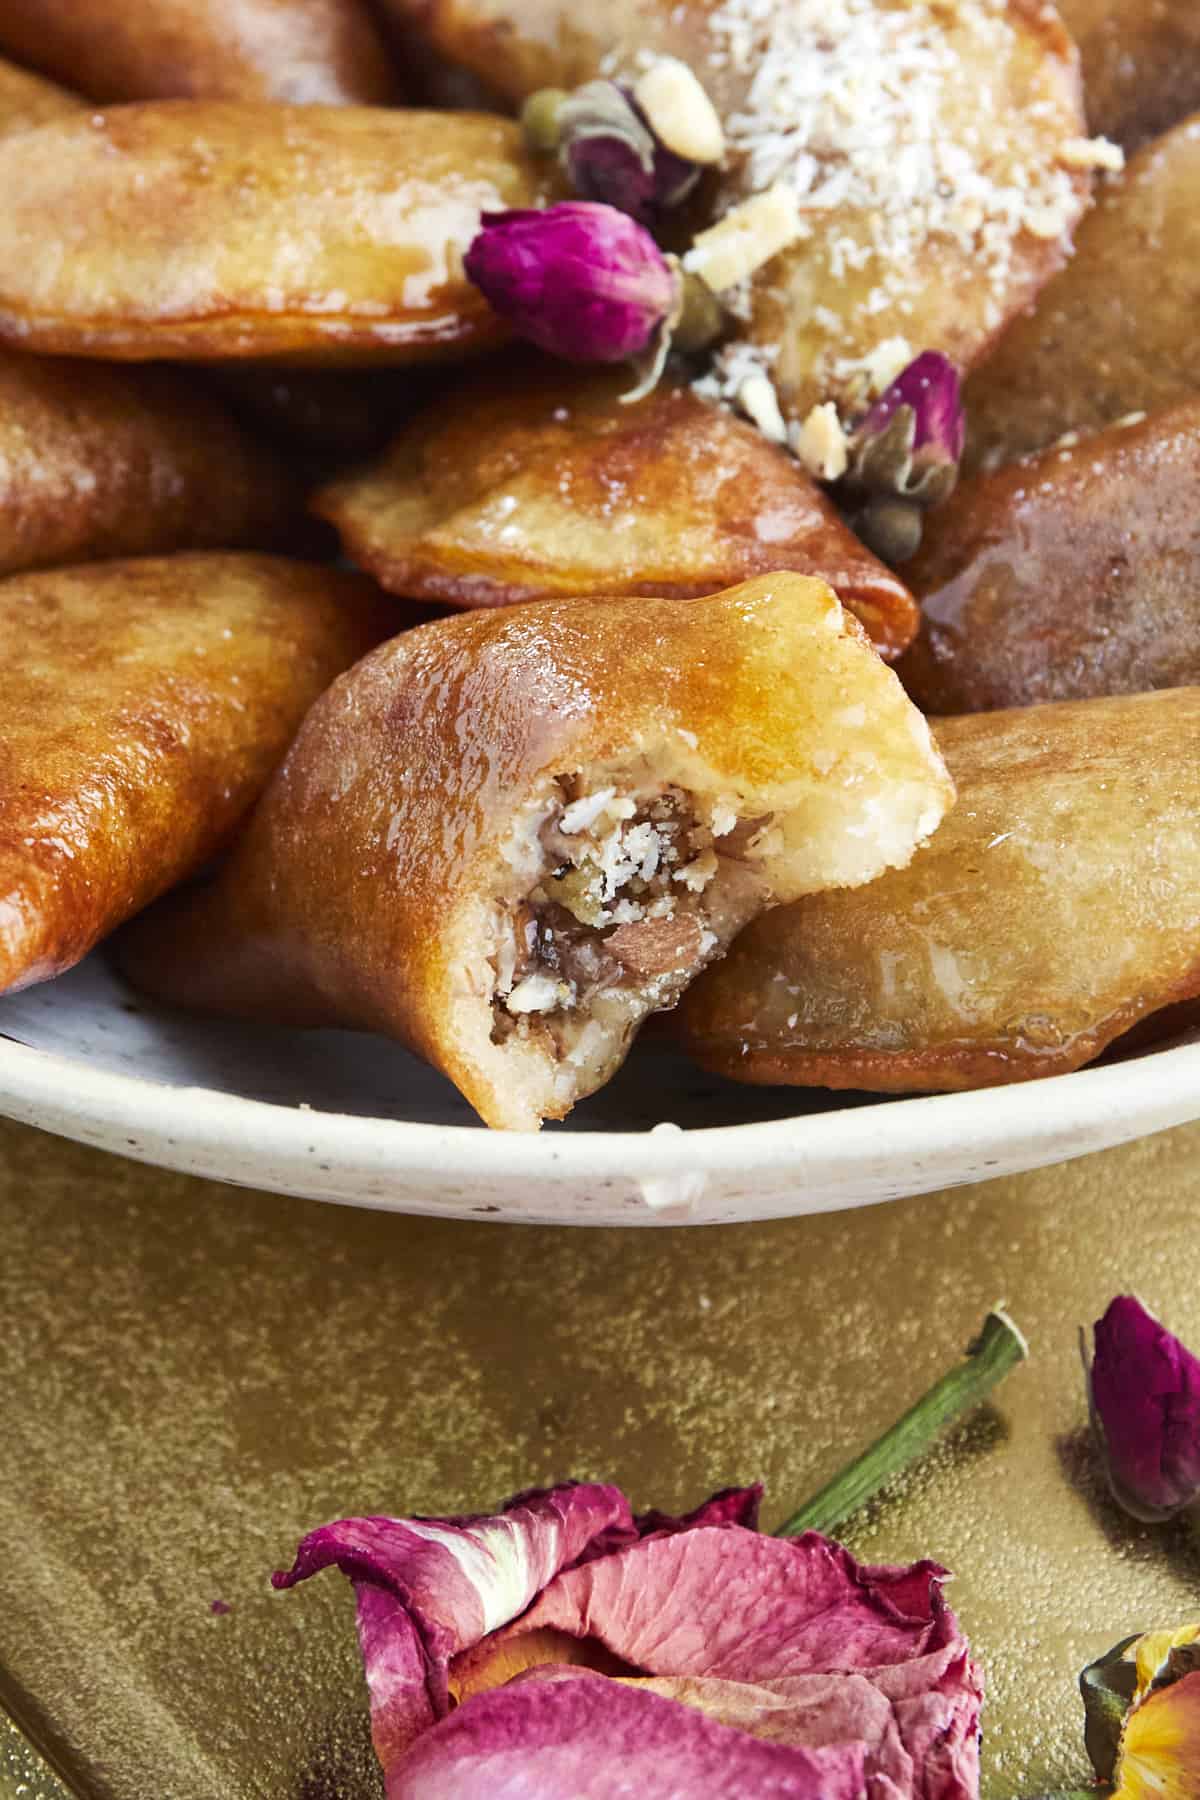 close up image of a plate full of qatayef with one piece missing a bite